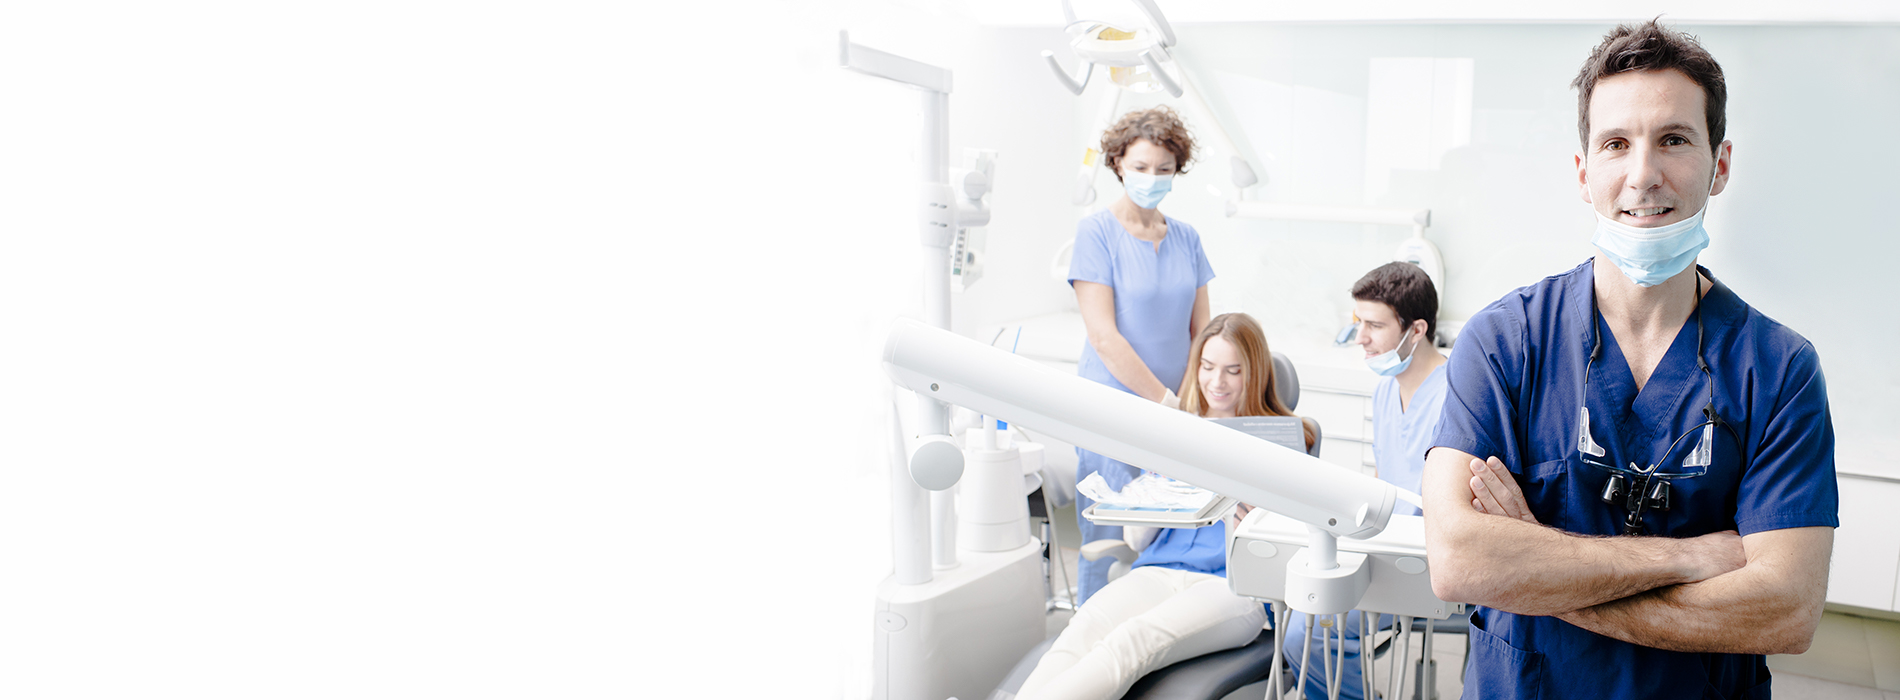 The image shows a dental office interior with a dentist standing in front of the camera, smiling at it.